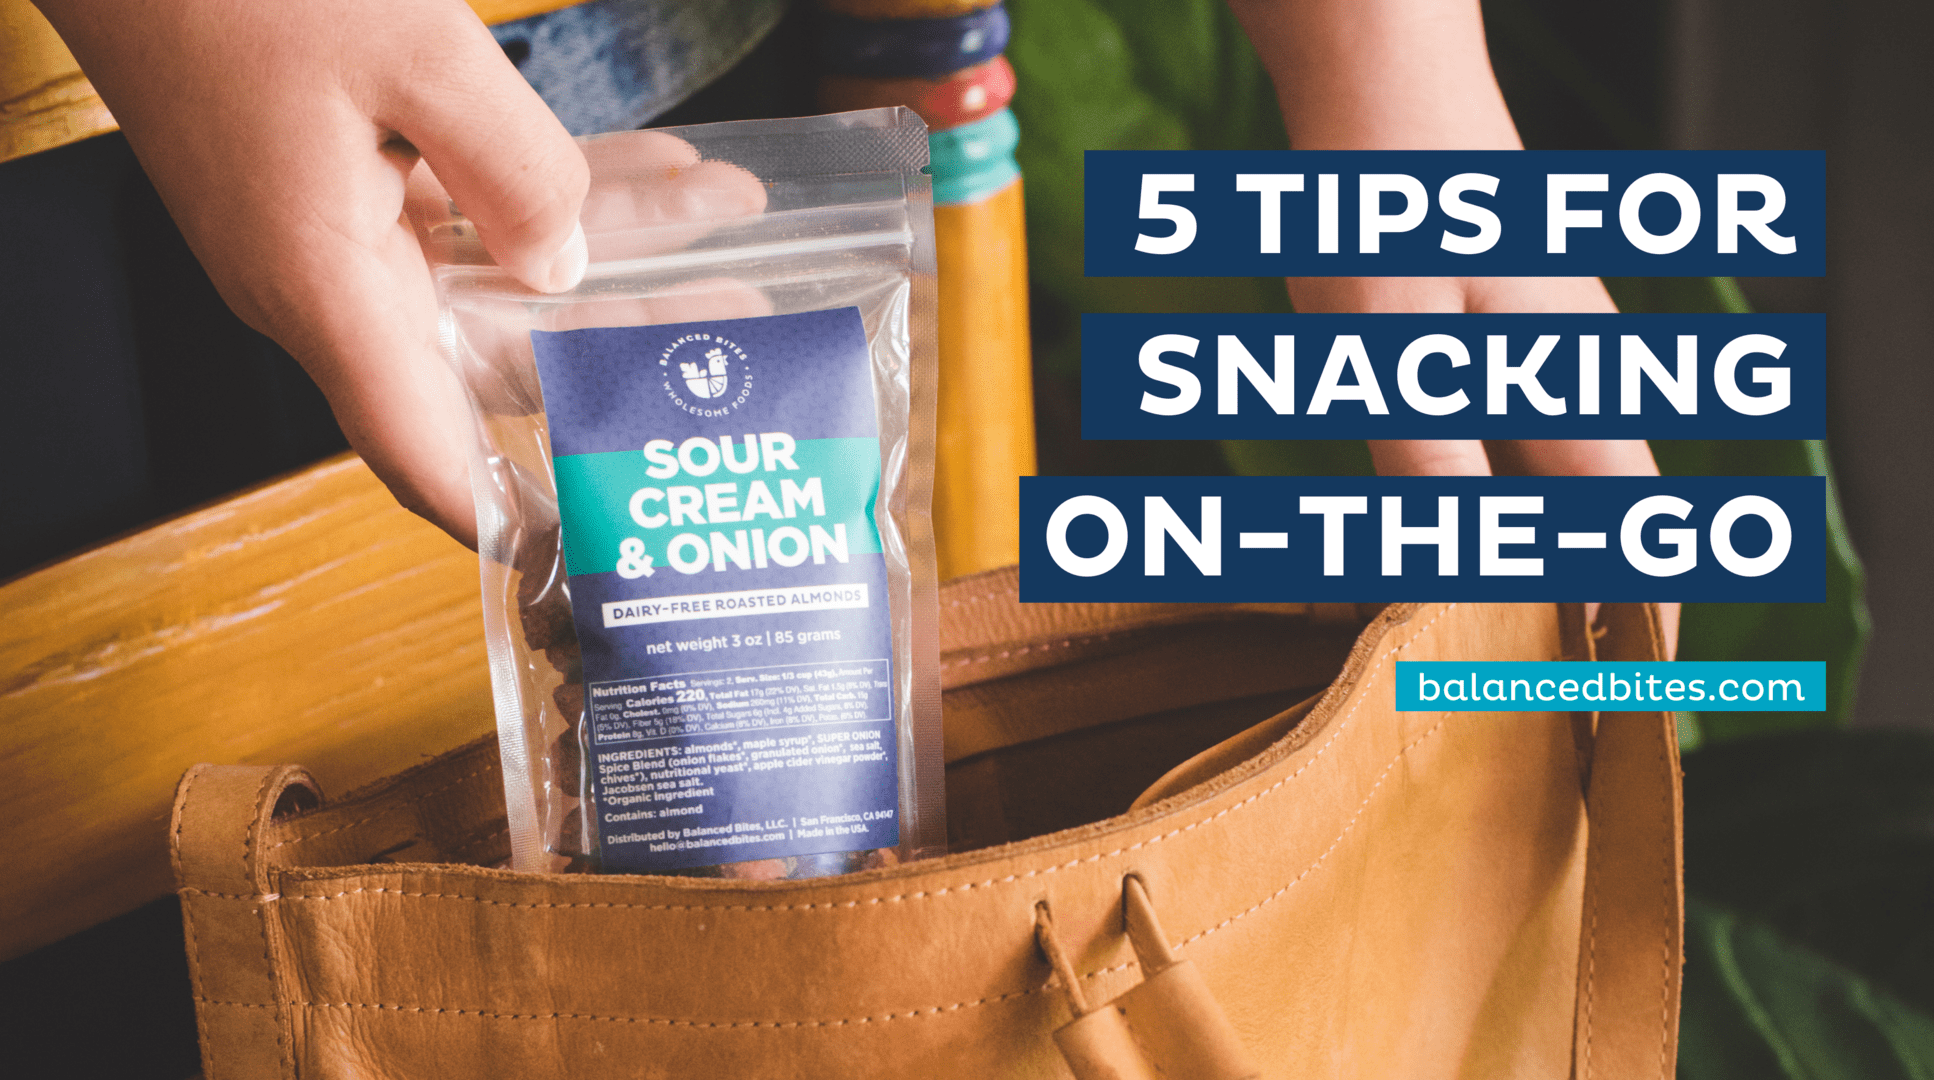 Featured image for “5 Tips For Snacking On-The-Go”